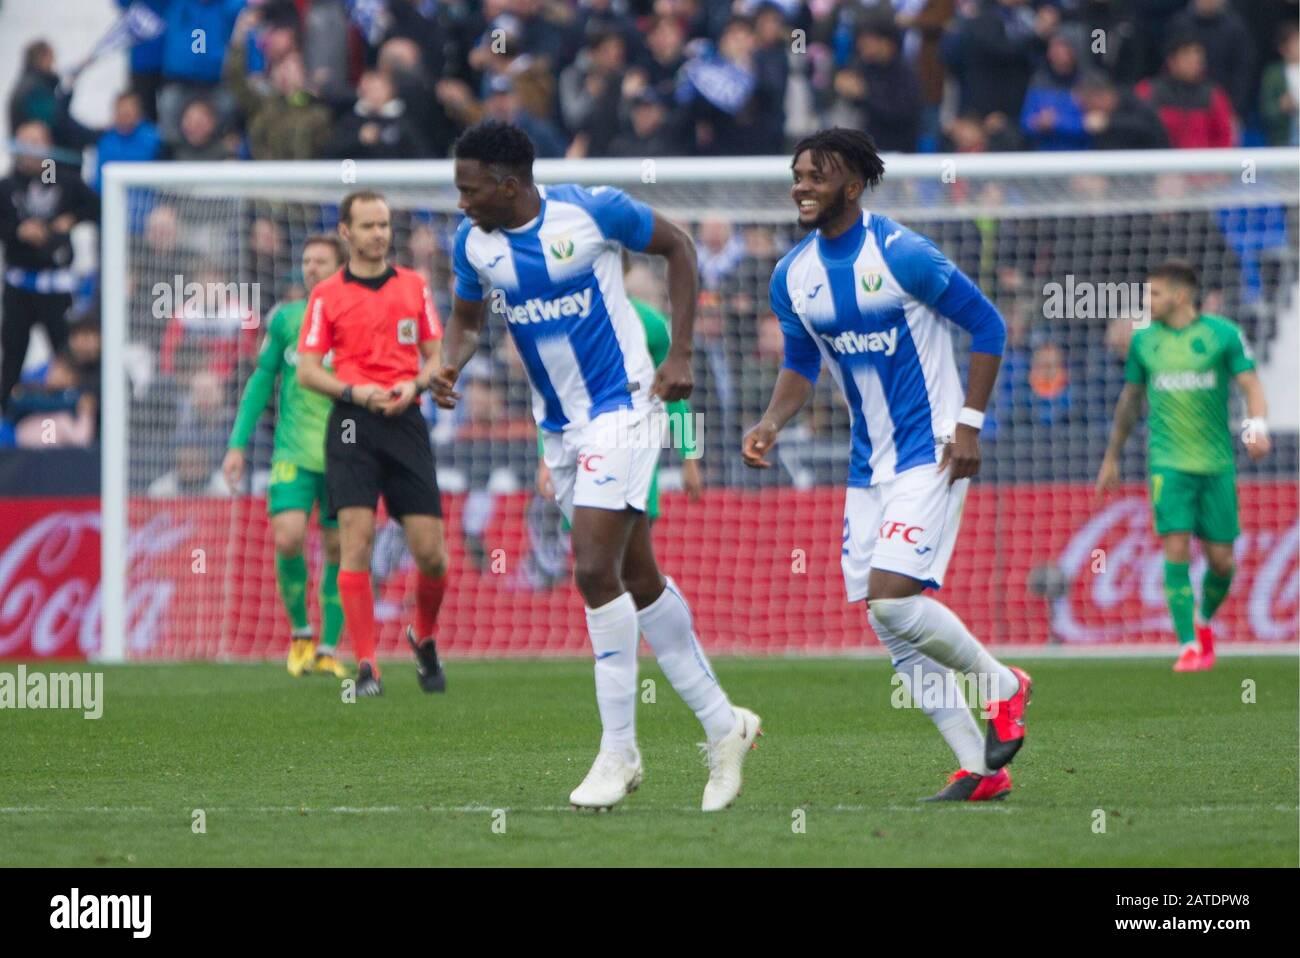 Madrid, Spain. 02nd Feb, 2020. CELEBRATE SCORE OF KENNETH OMERUO DURING MATCH LEGANES VERSUS REAL SOCIEDAD AT BUTARQUE STADIUM. SUNDAY, 2 FEBRUARY 2020 Credit: CORDON PRESS/Alamy Live News Stock Photo